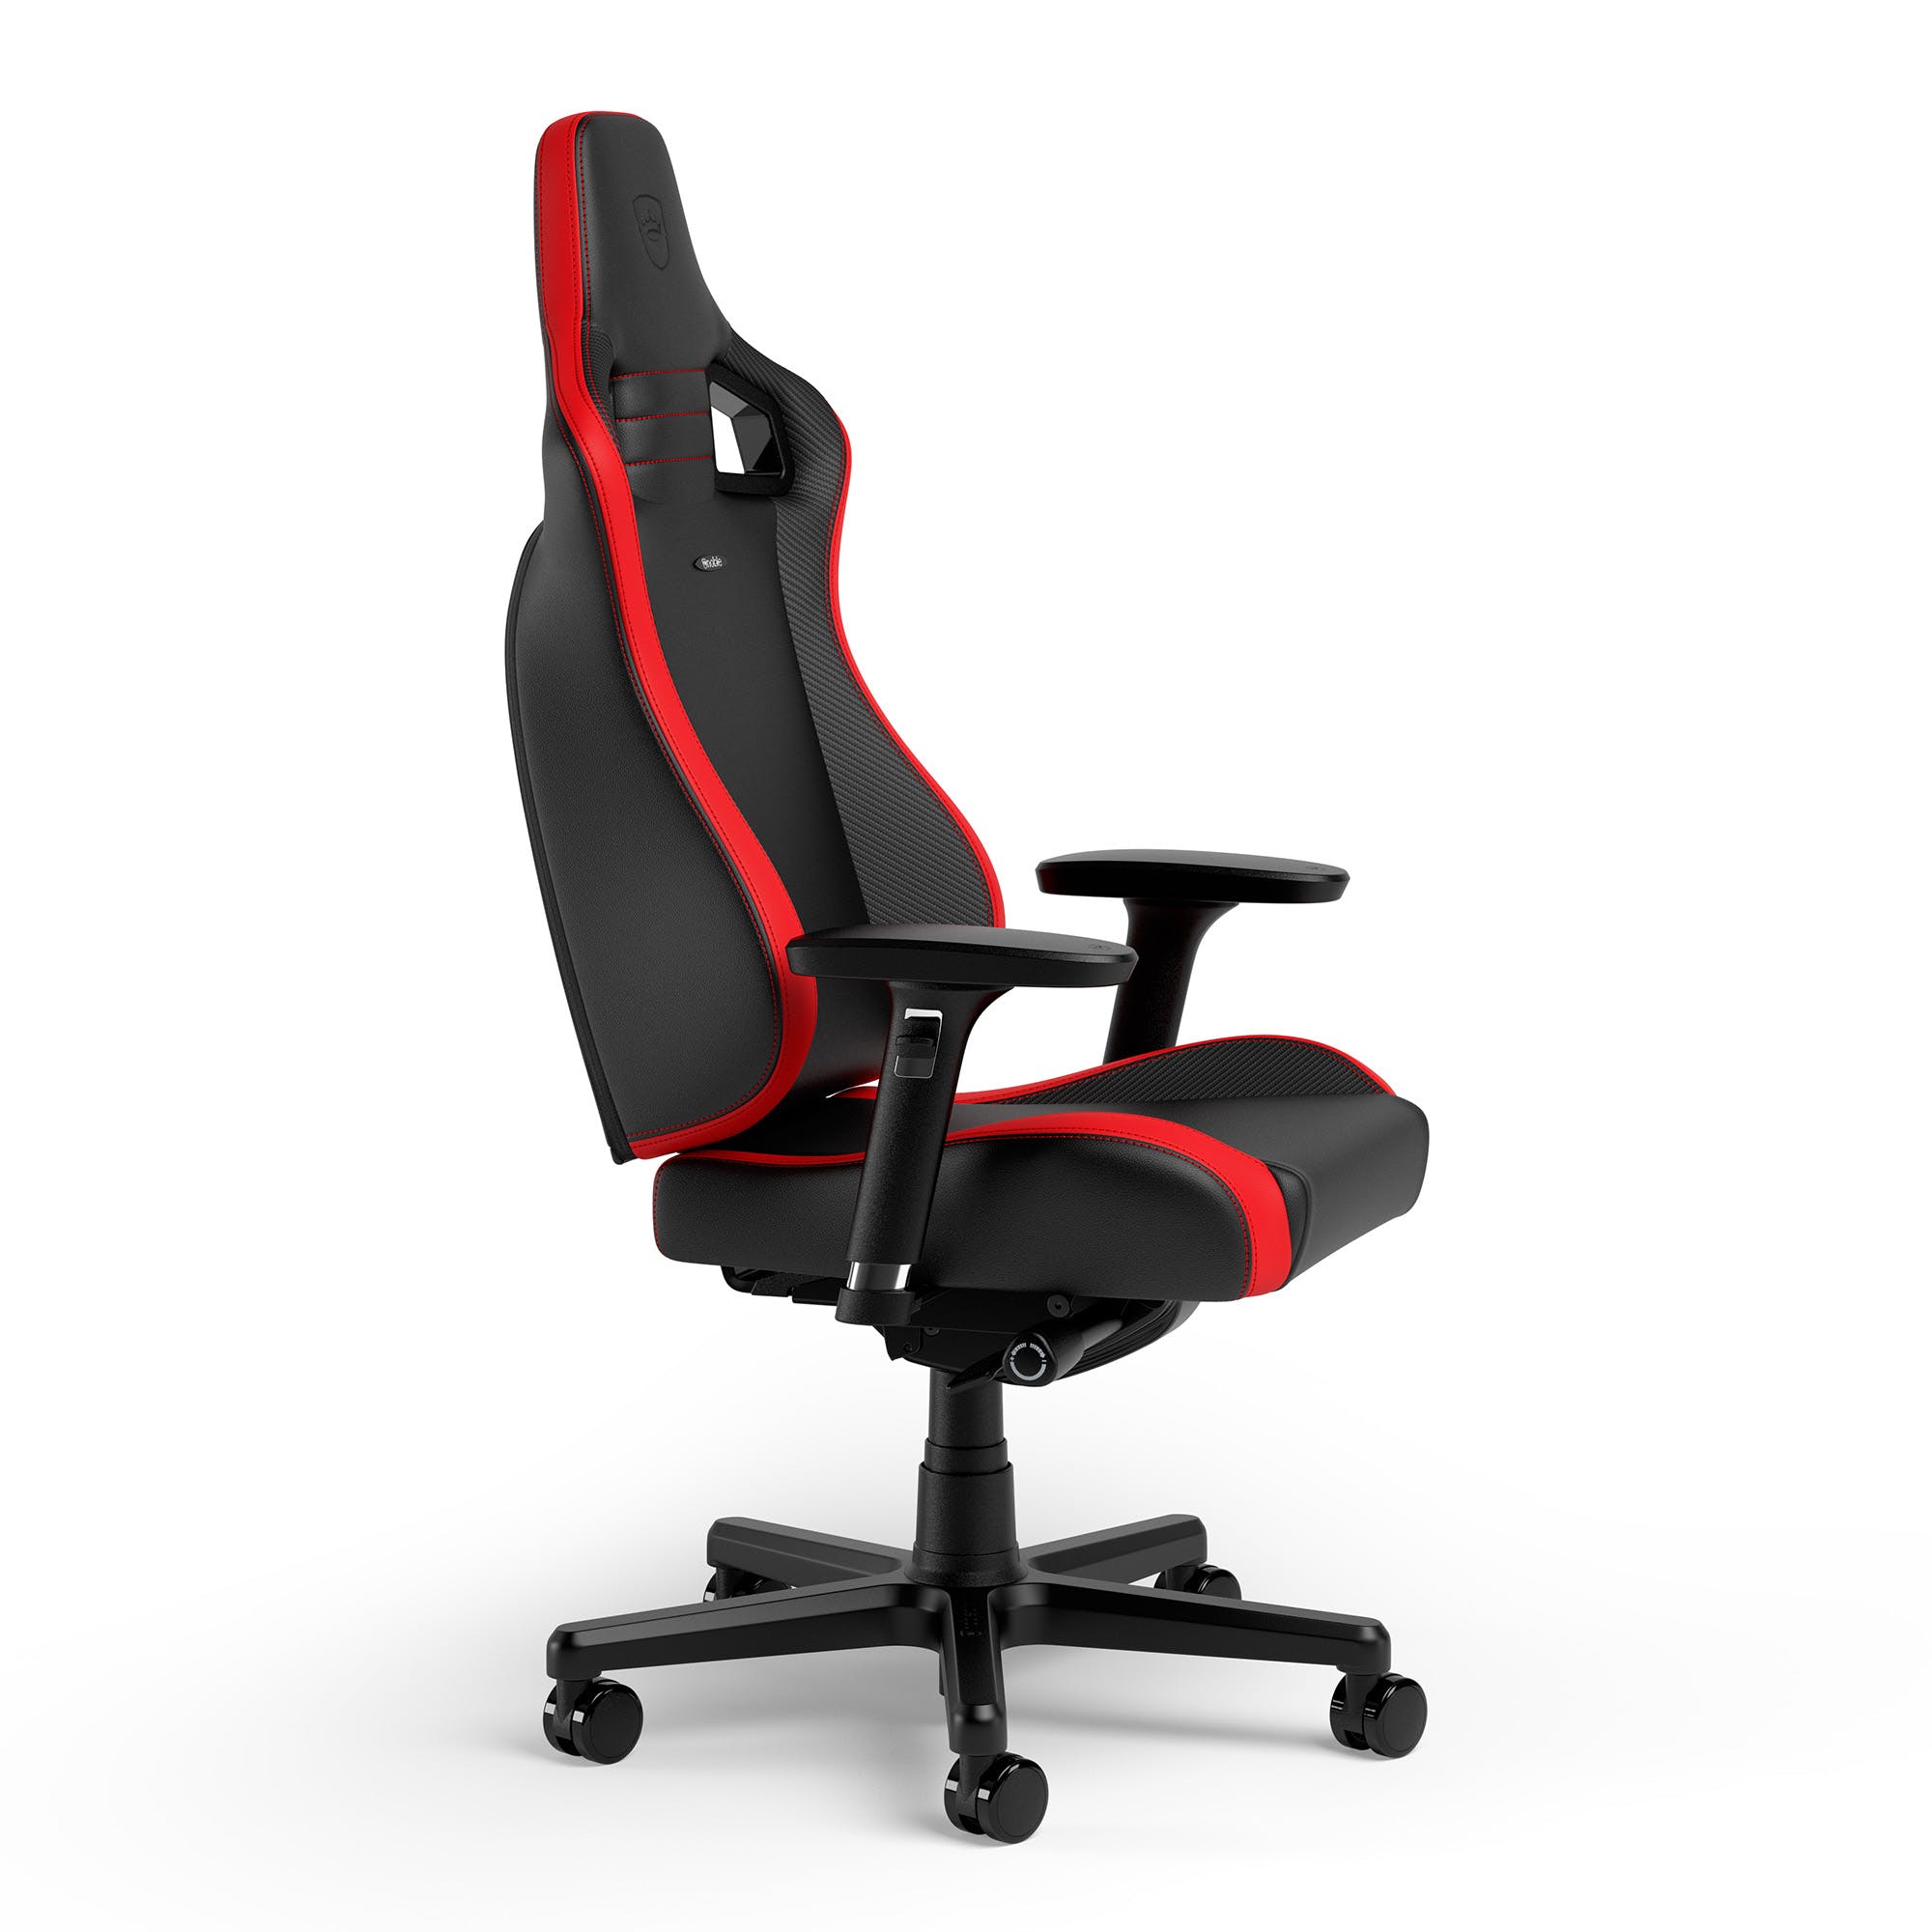 noblechairs - noblechairs EPIC Compact Gaming Chair-carbon/black/red